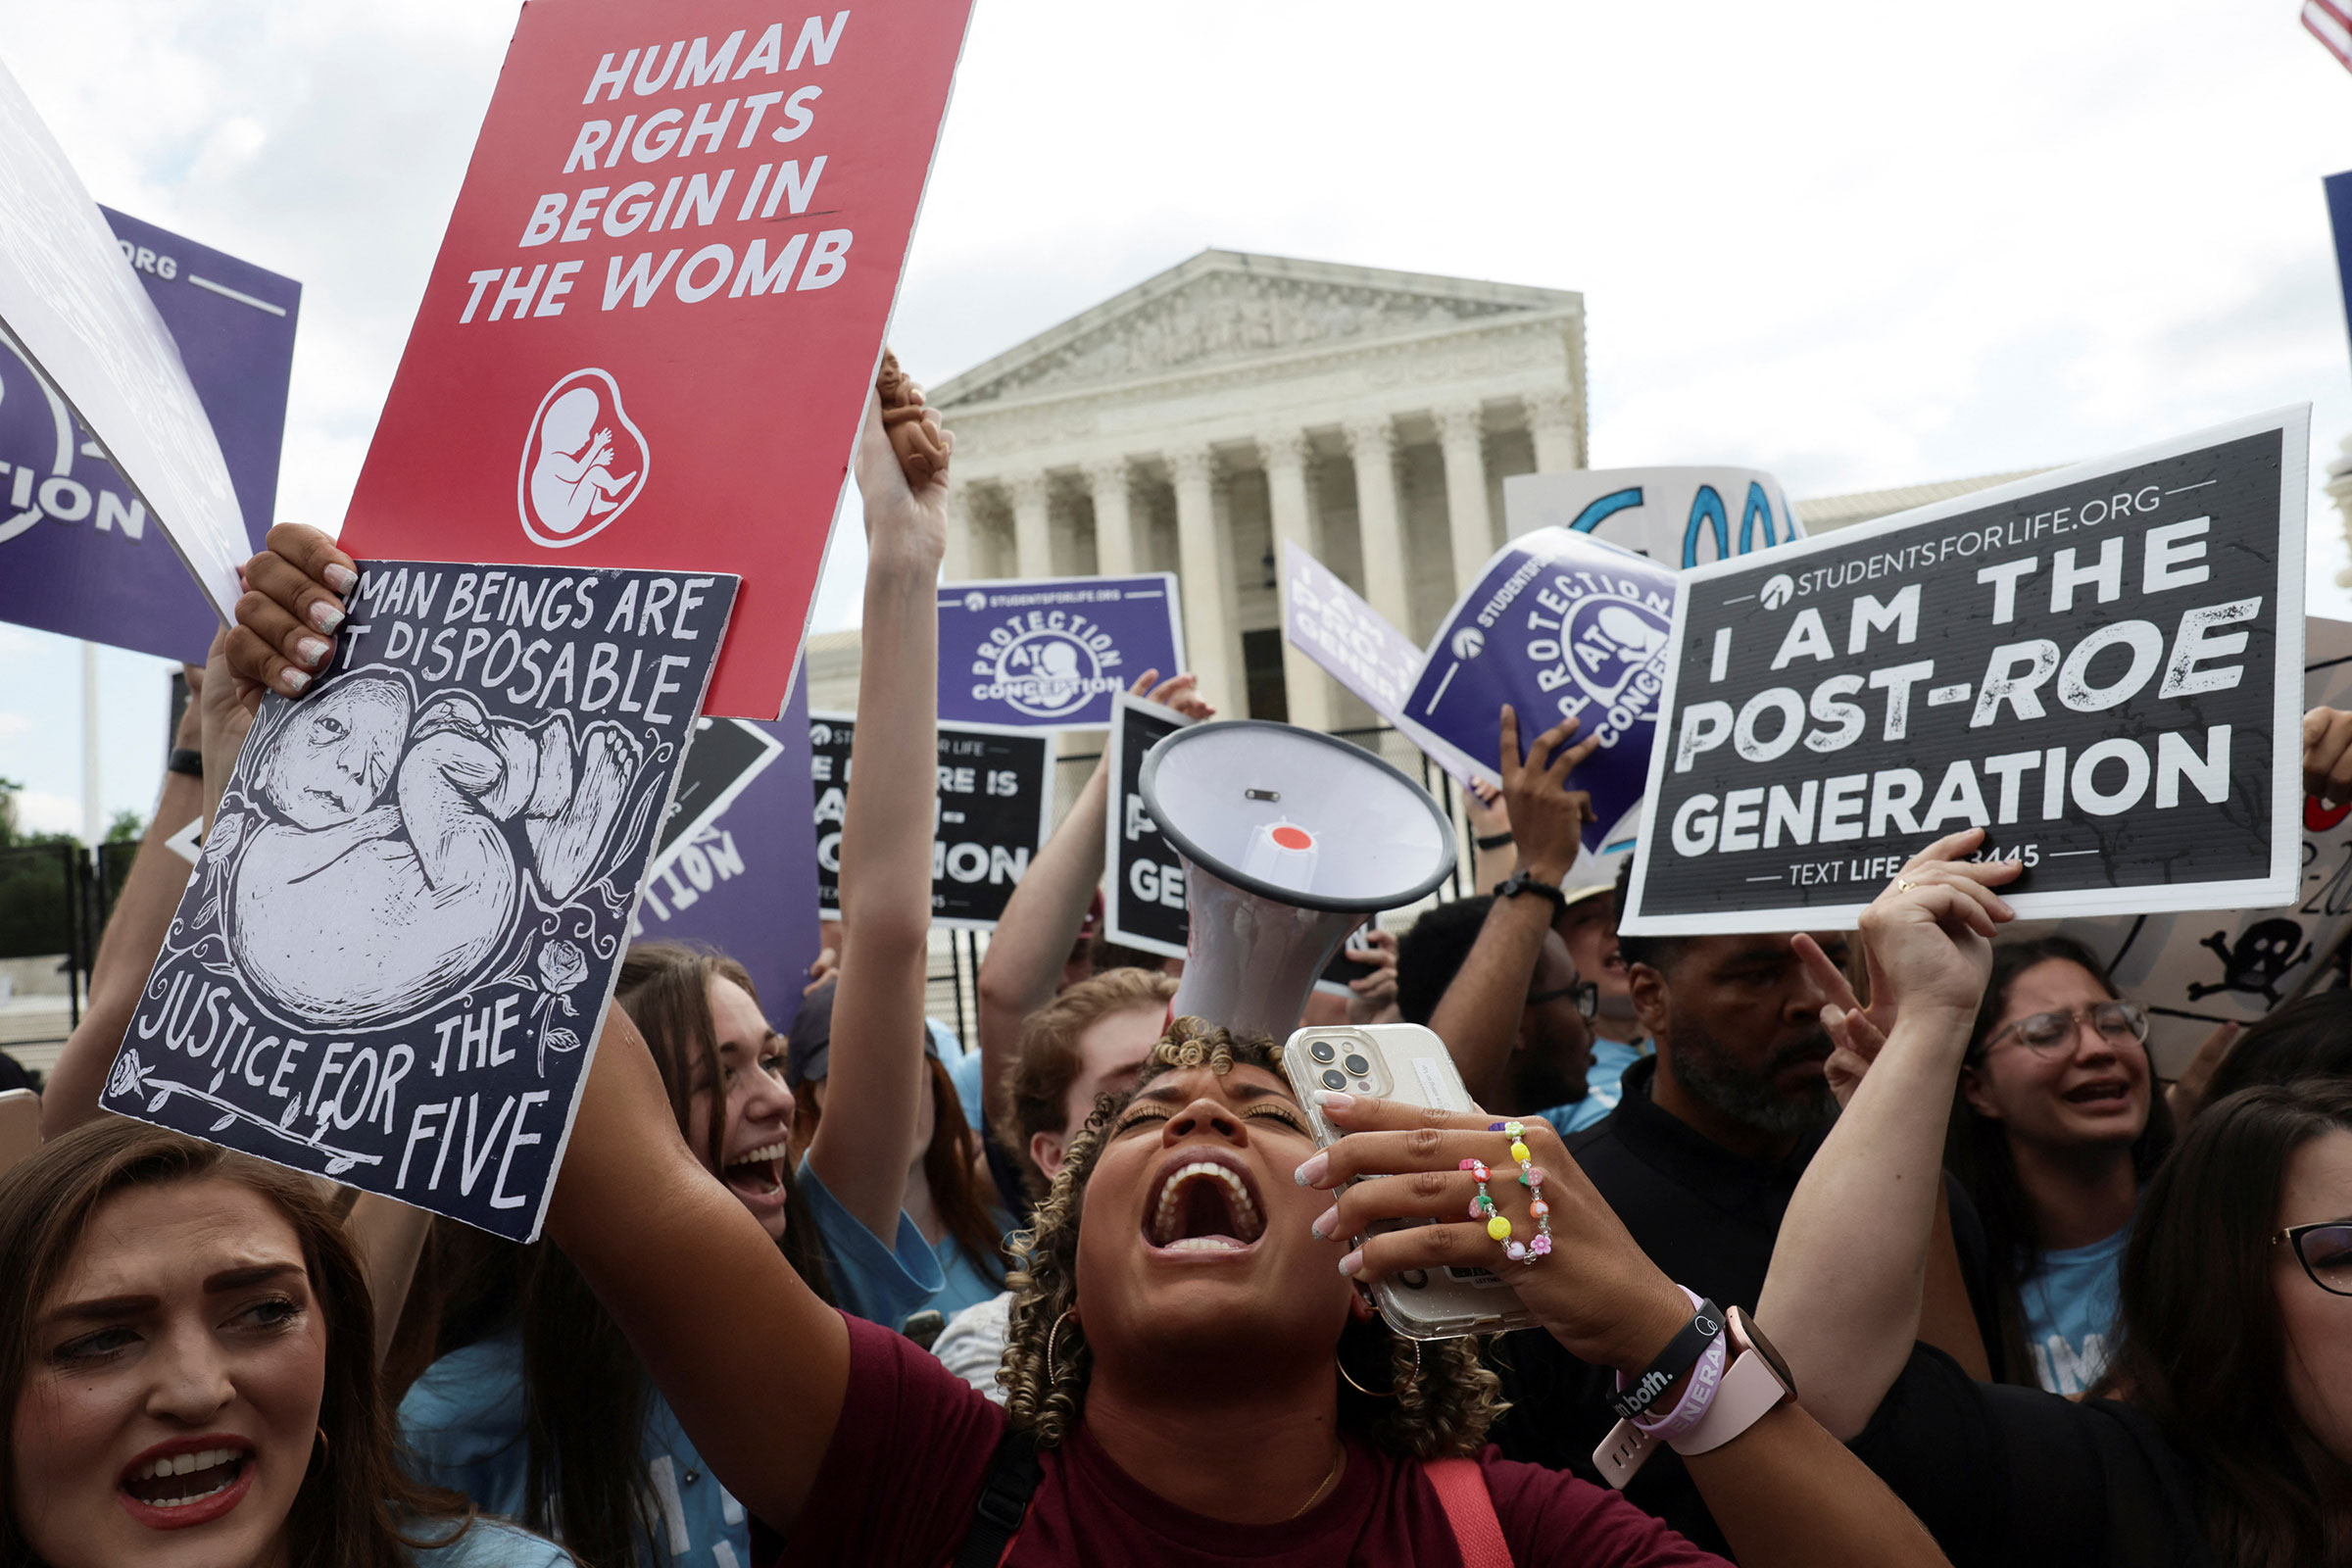 Anti-abortion demonstrators celebrate outside the United States Supreme Court as the court rules in the Dobbs v. Jackson Women’s Health Organization abortion case in Washington, D.C., June 24, 2022. (Evelyn Hockstein—Reuters)